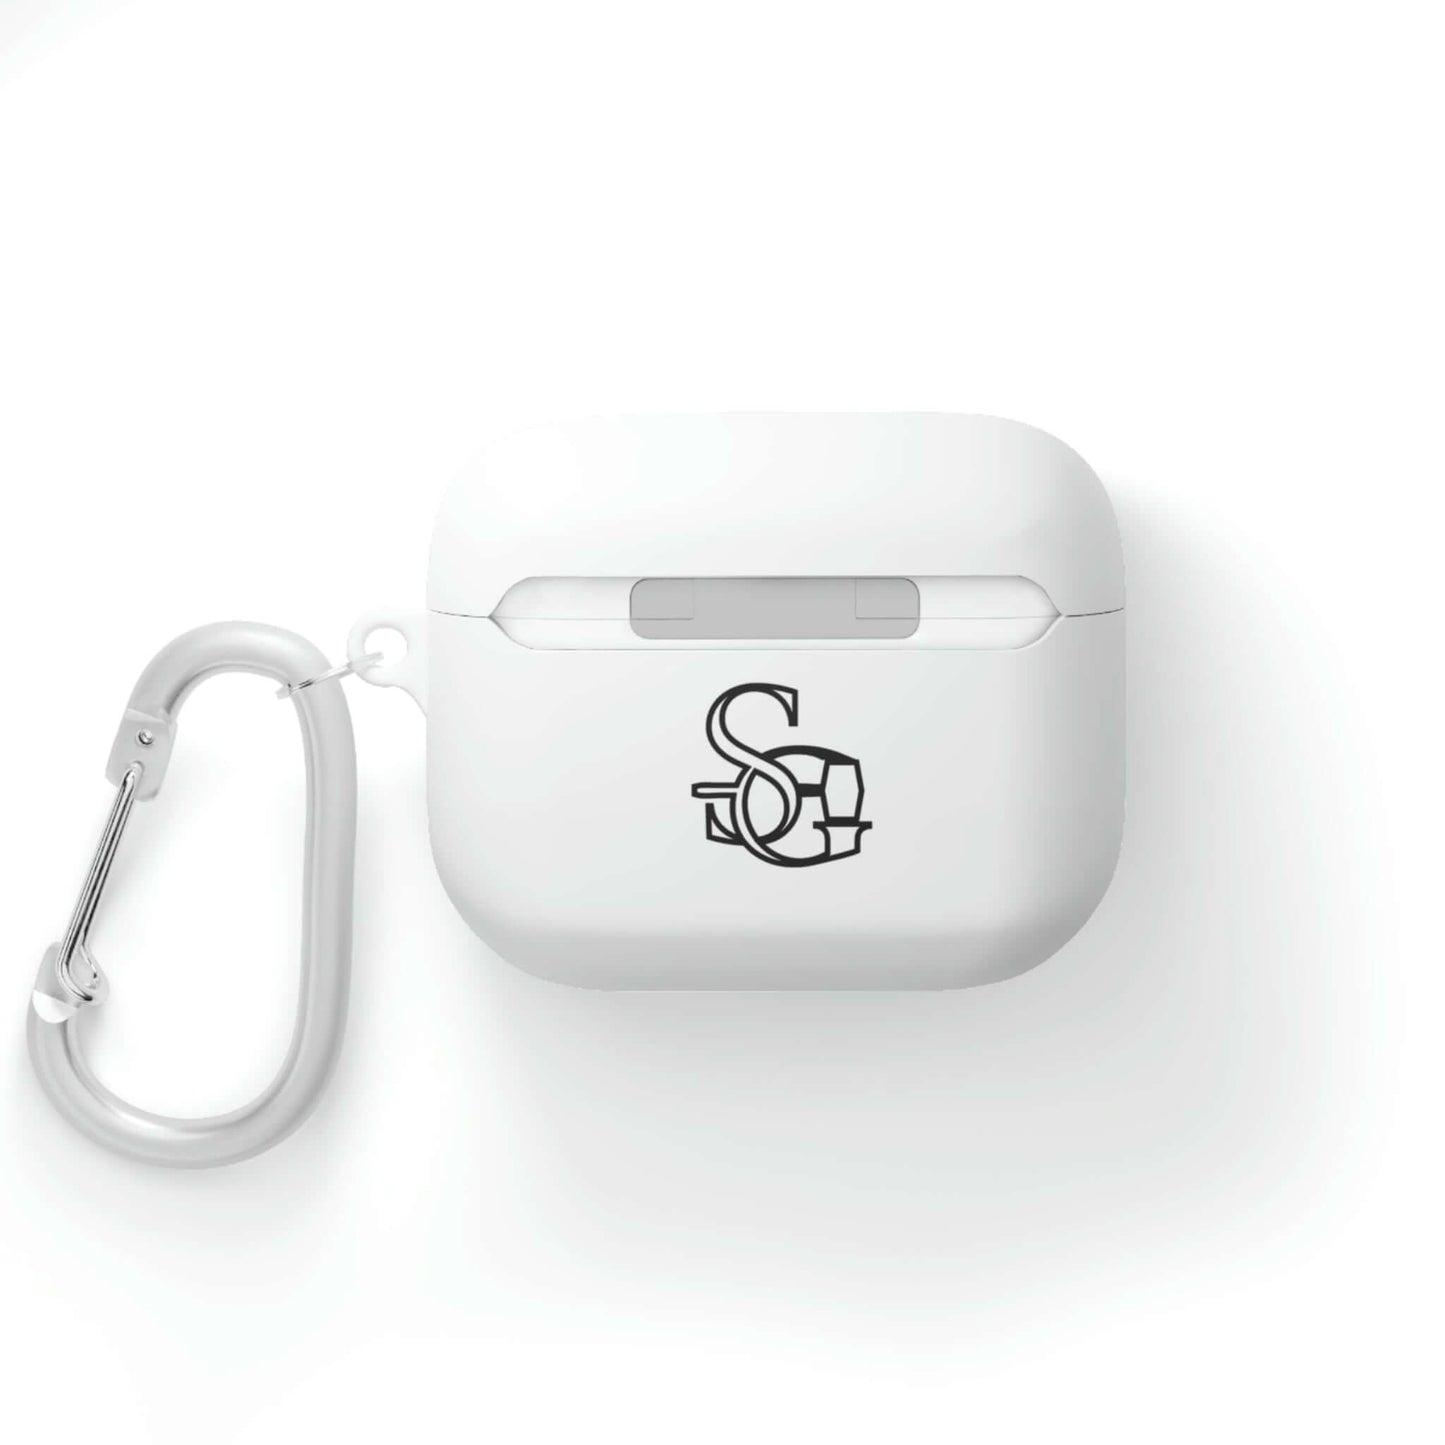 Air Pod Case with white cover with Six-Gen Forge Logo